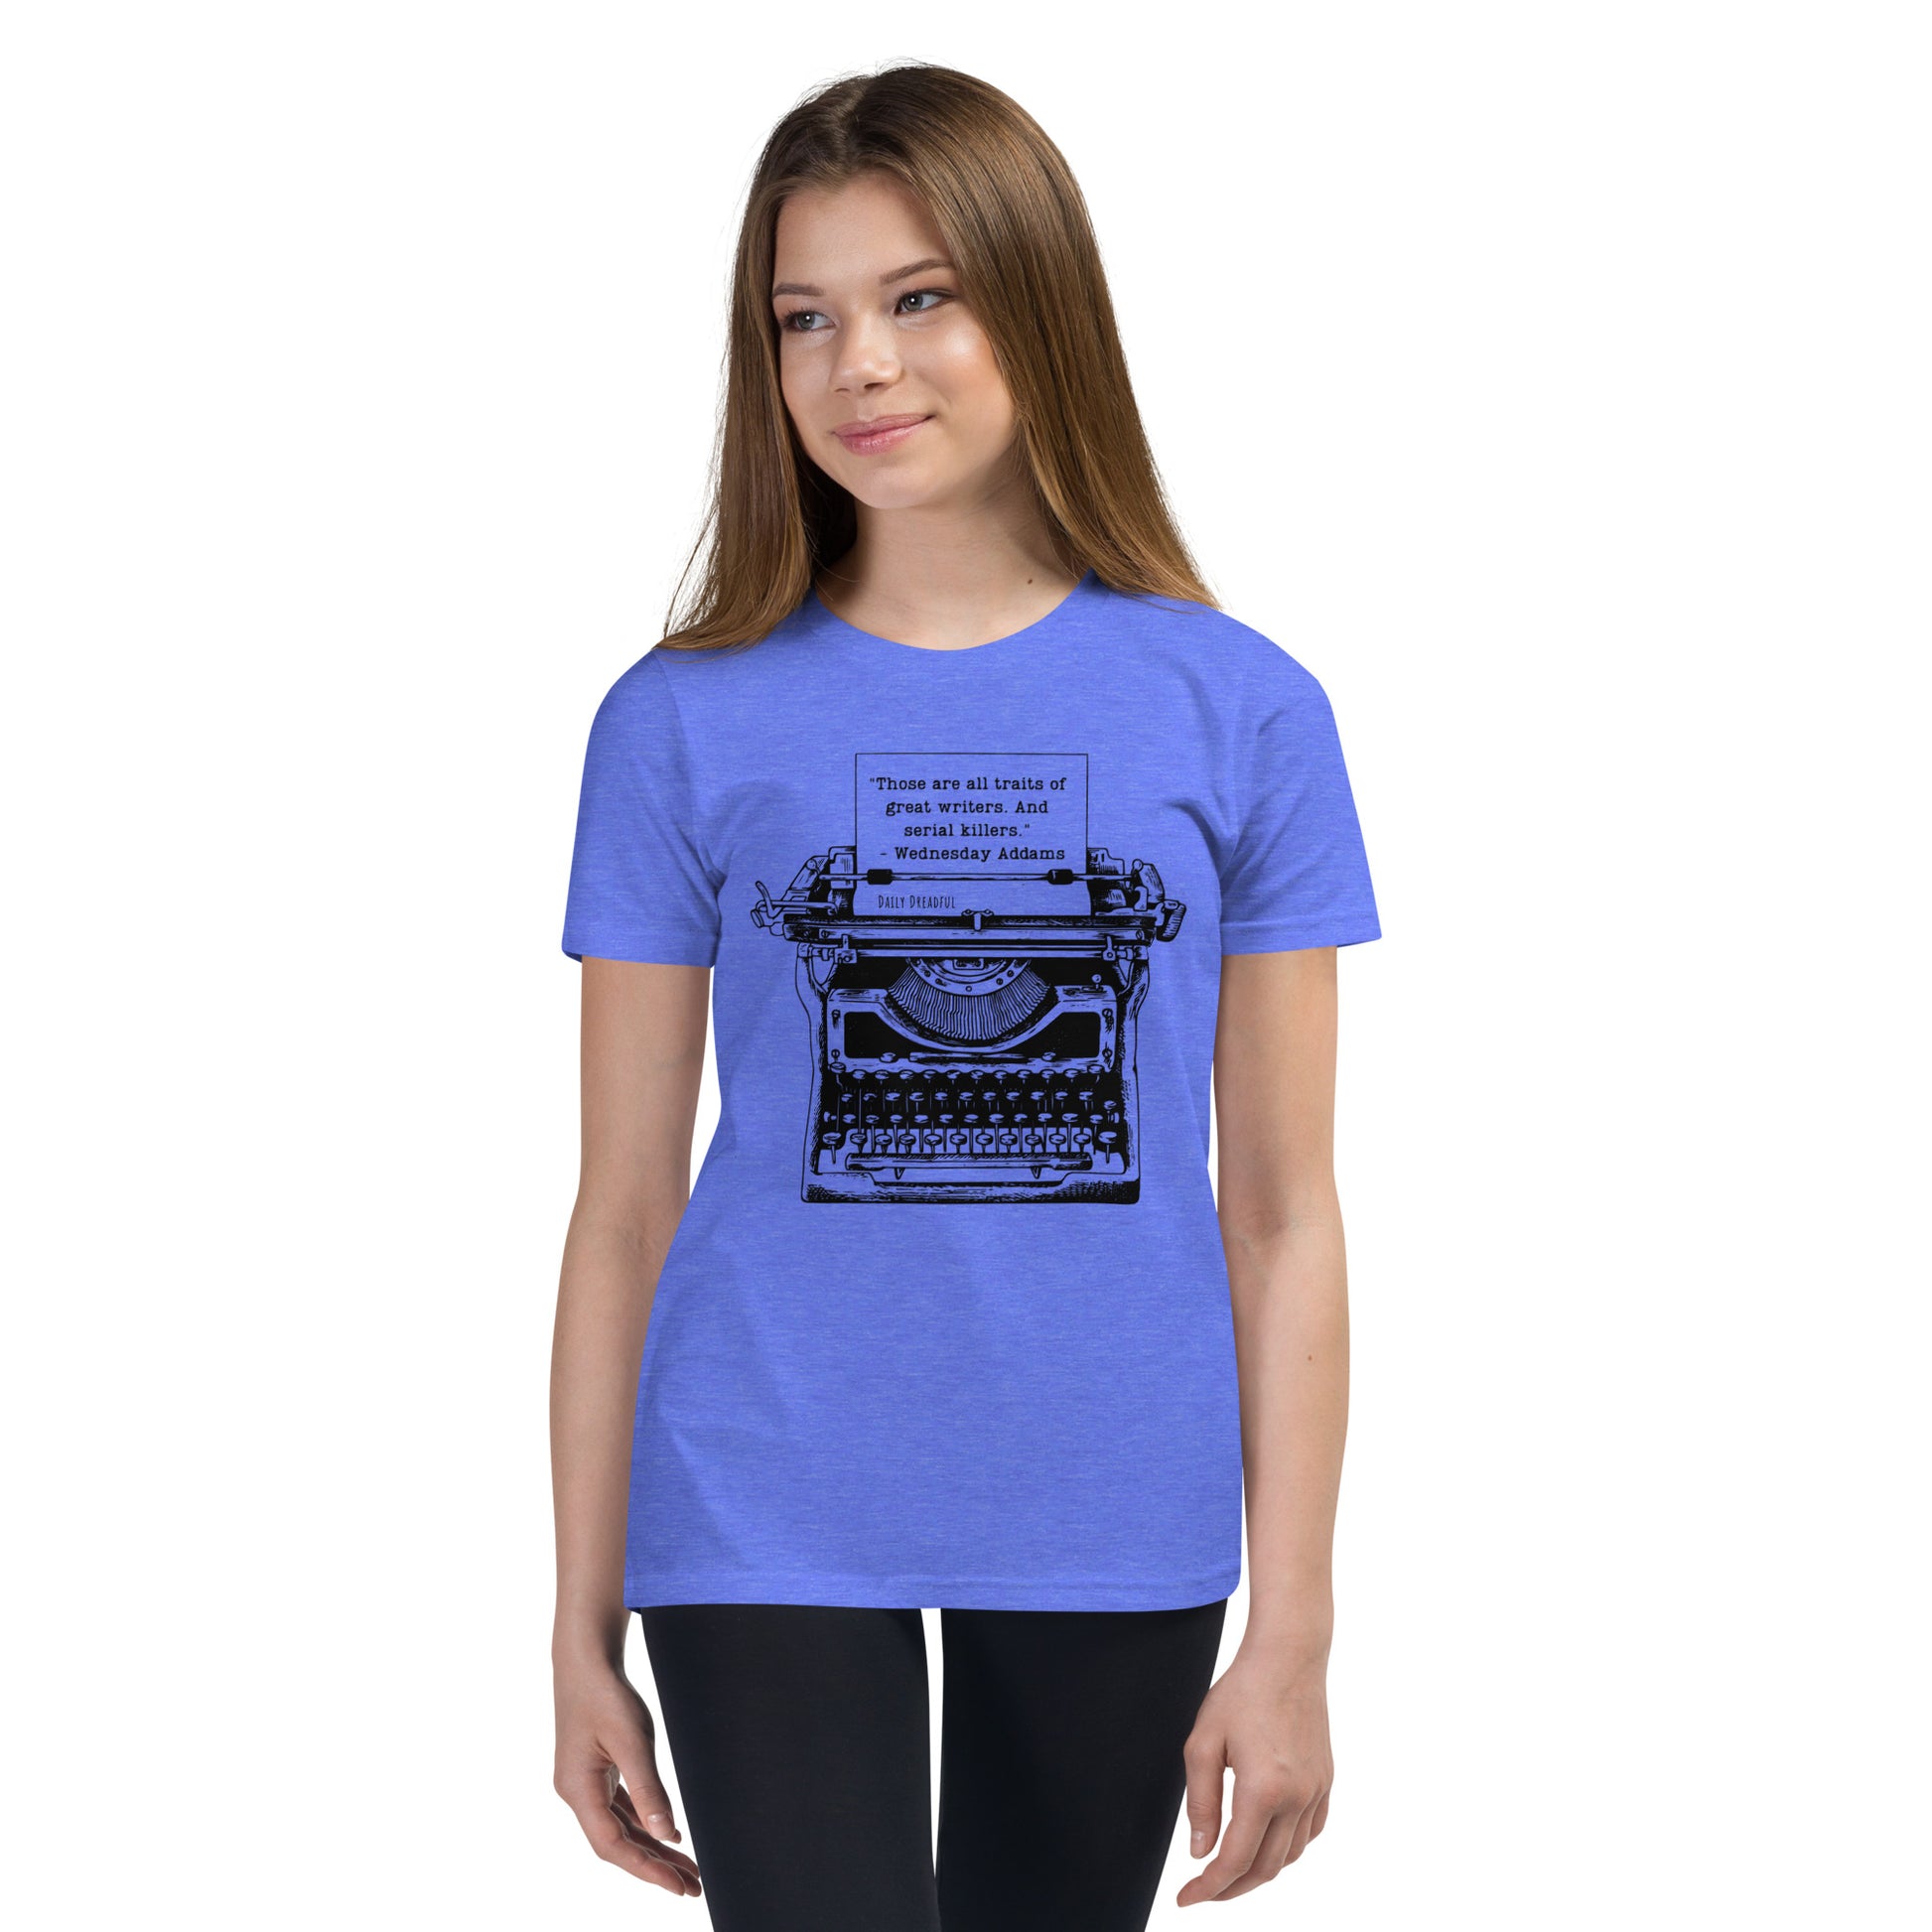 heather columbia blue "Wednesday Addams Typewriter" Youth Short Sleeve T-Shirt from Daily Dreadful